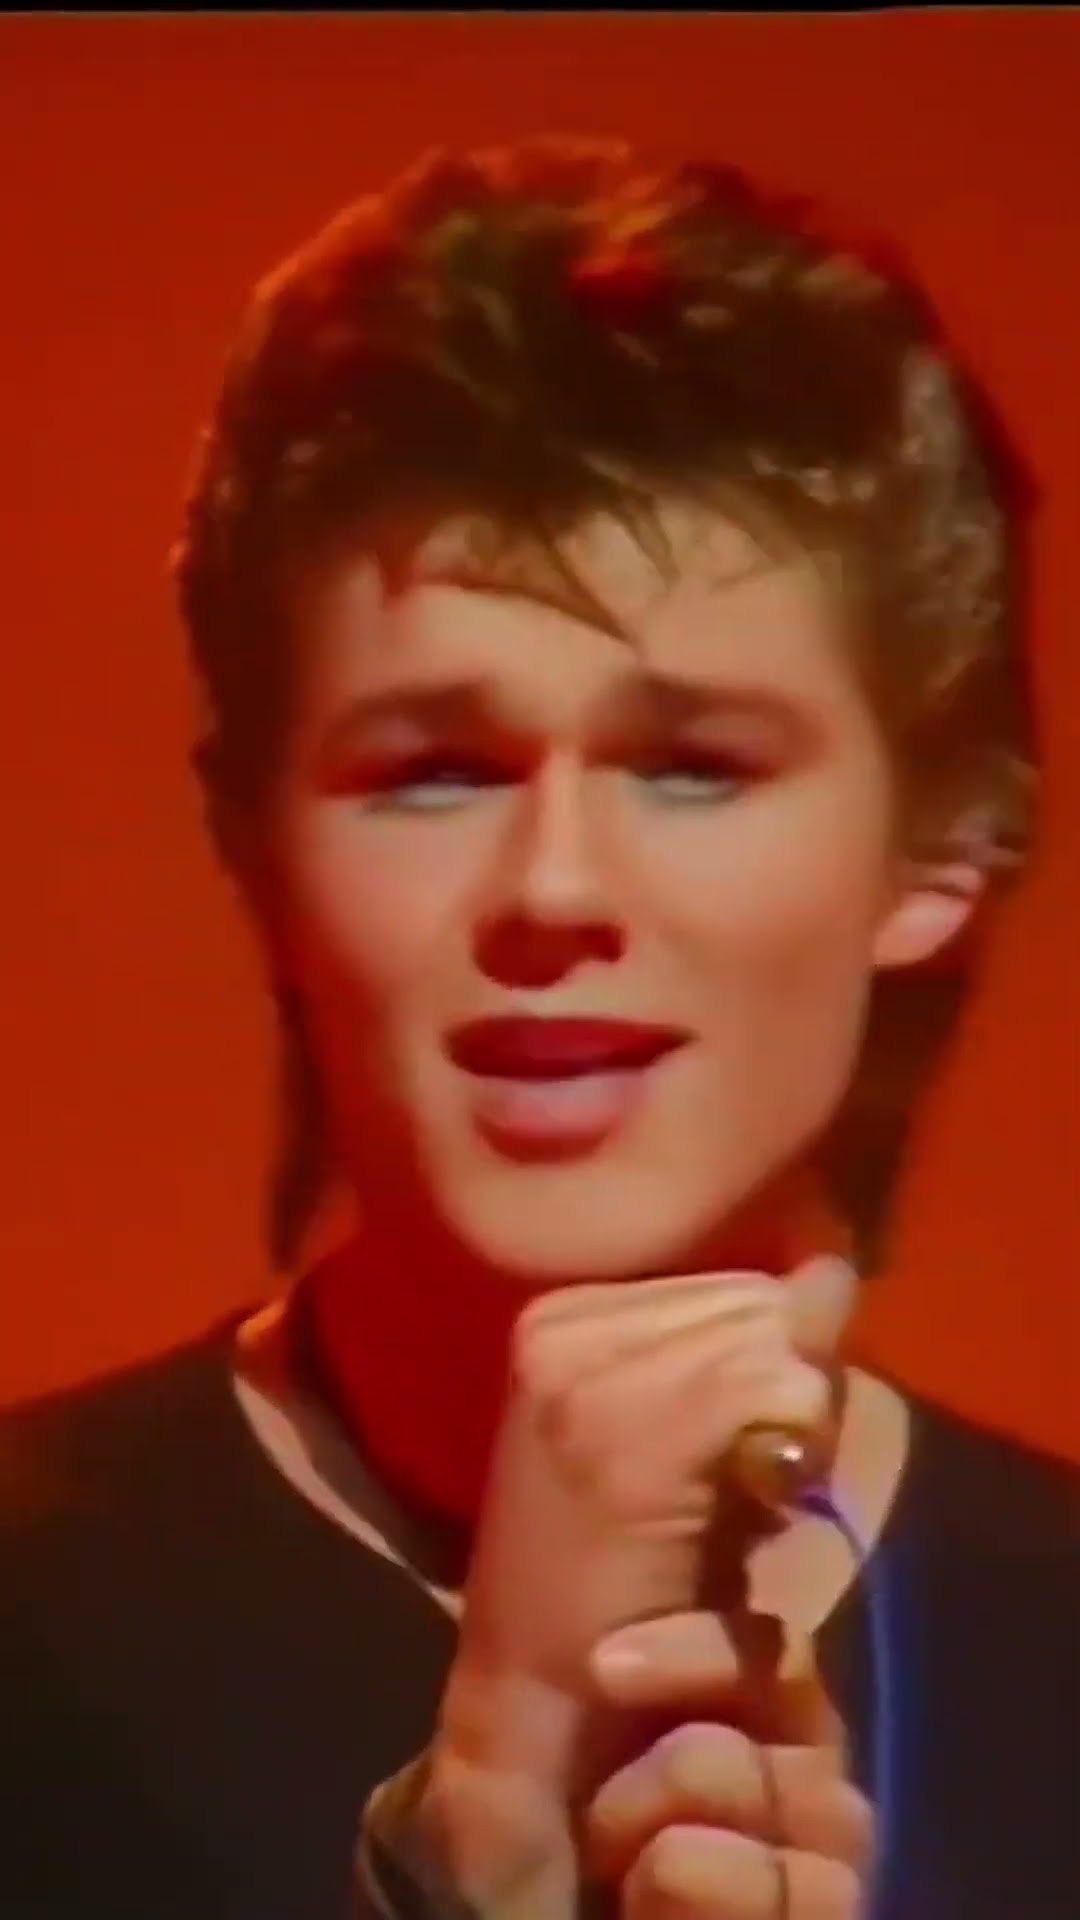 a-ha - Take On Me (Official Video) [Remastered in 4K] - YouTube